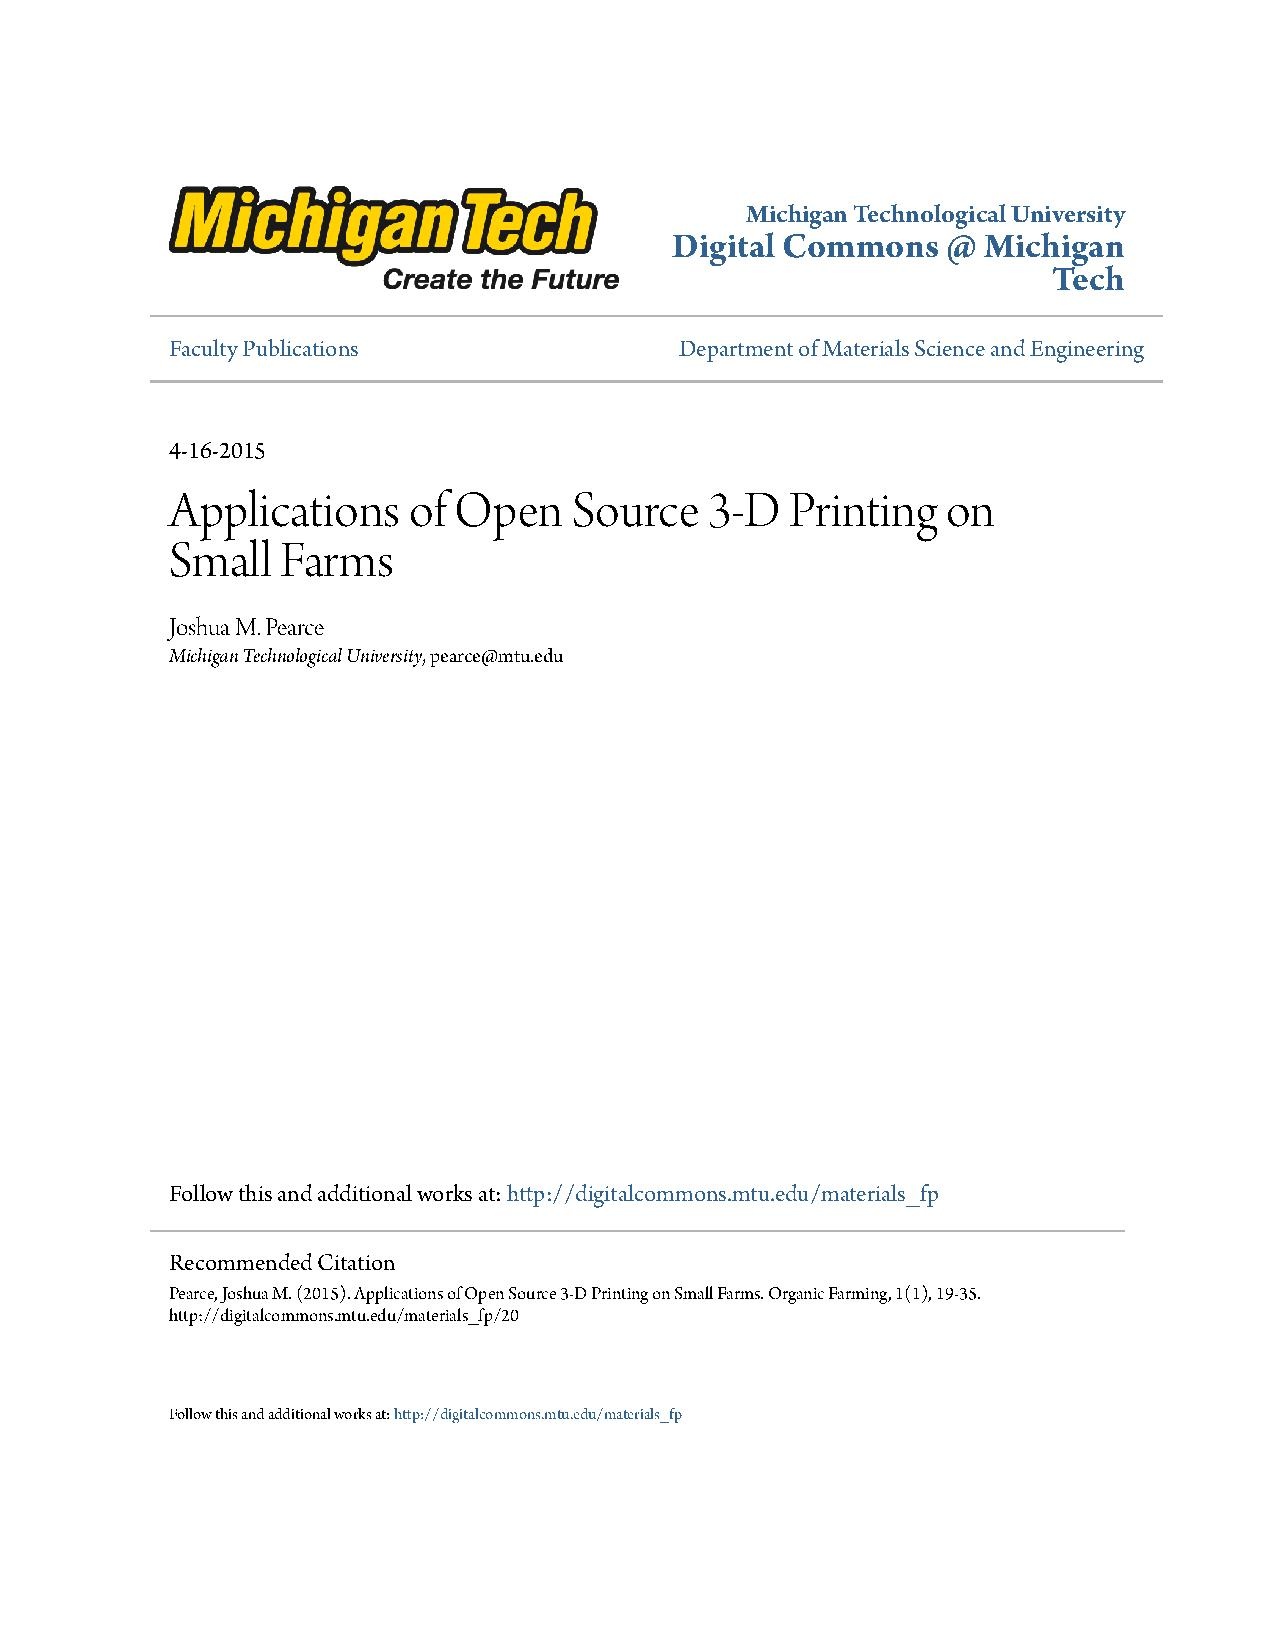 Applications of Open Source 3-D Printing on Small Farms.pdf